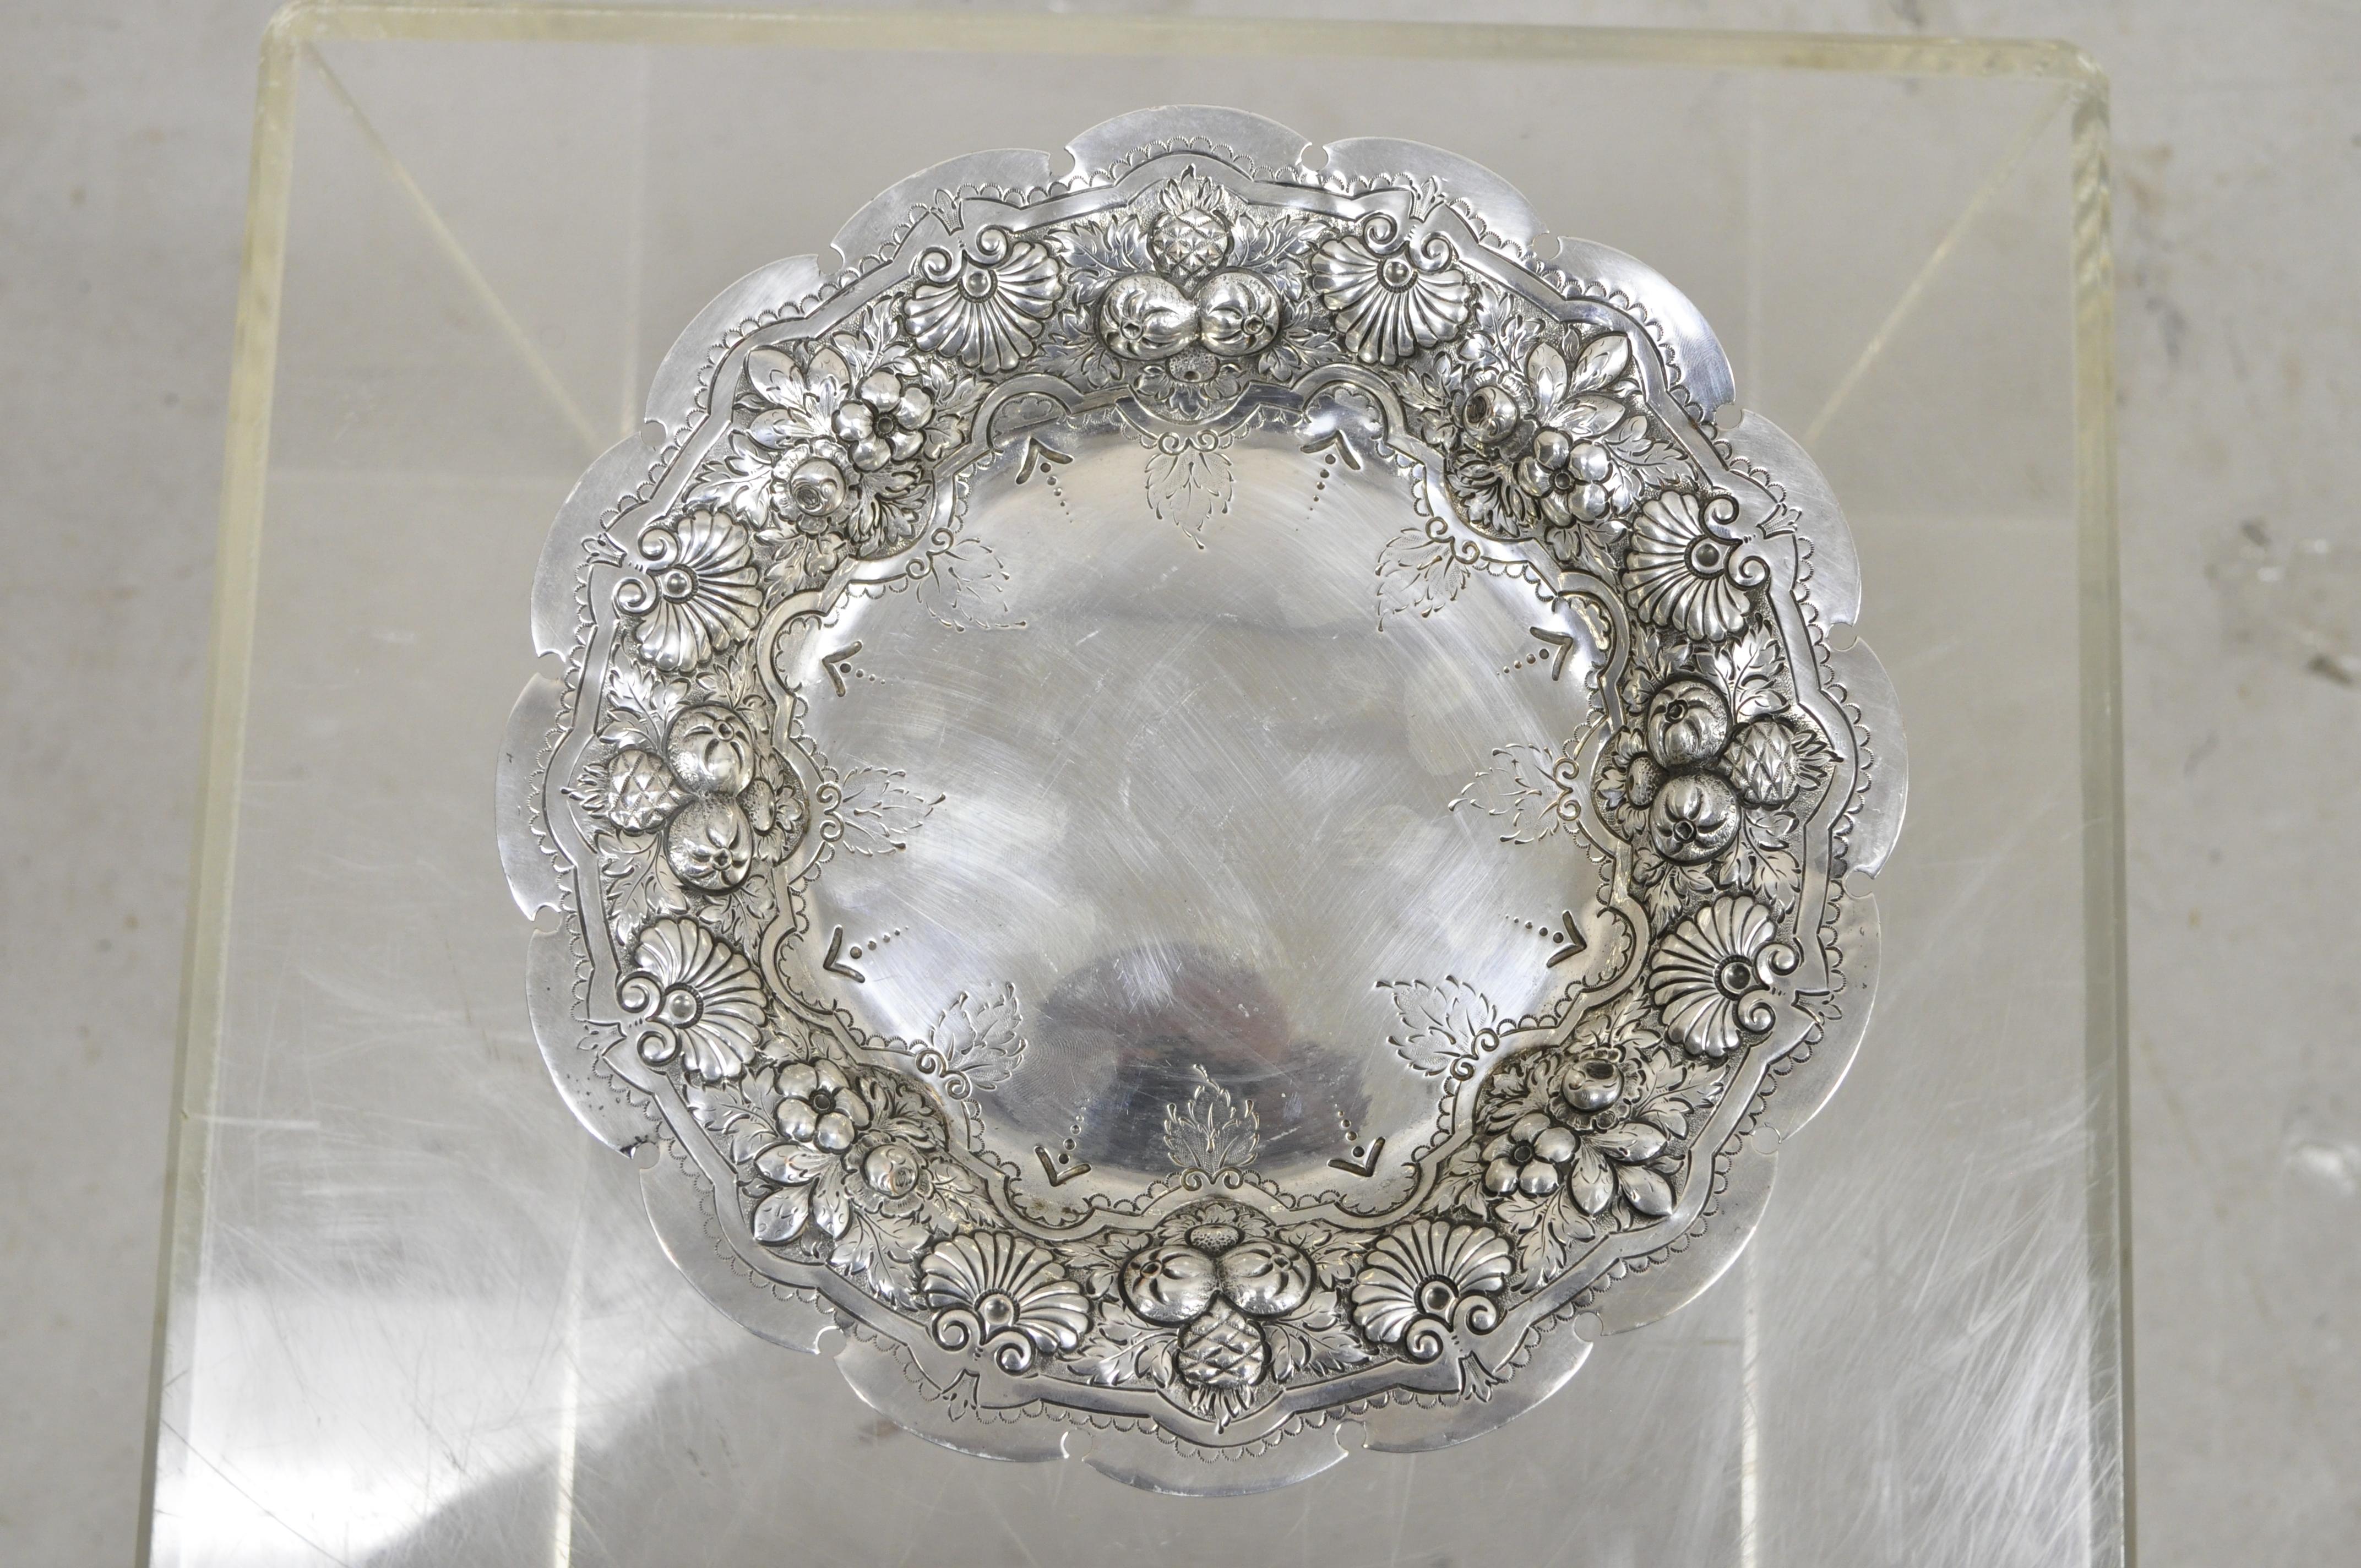 Walker & Hall Sheffield silver plate Regency fruit shell compote platter stand. Item features a pierce carved scalloped edge, fruit and shell border, marked 